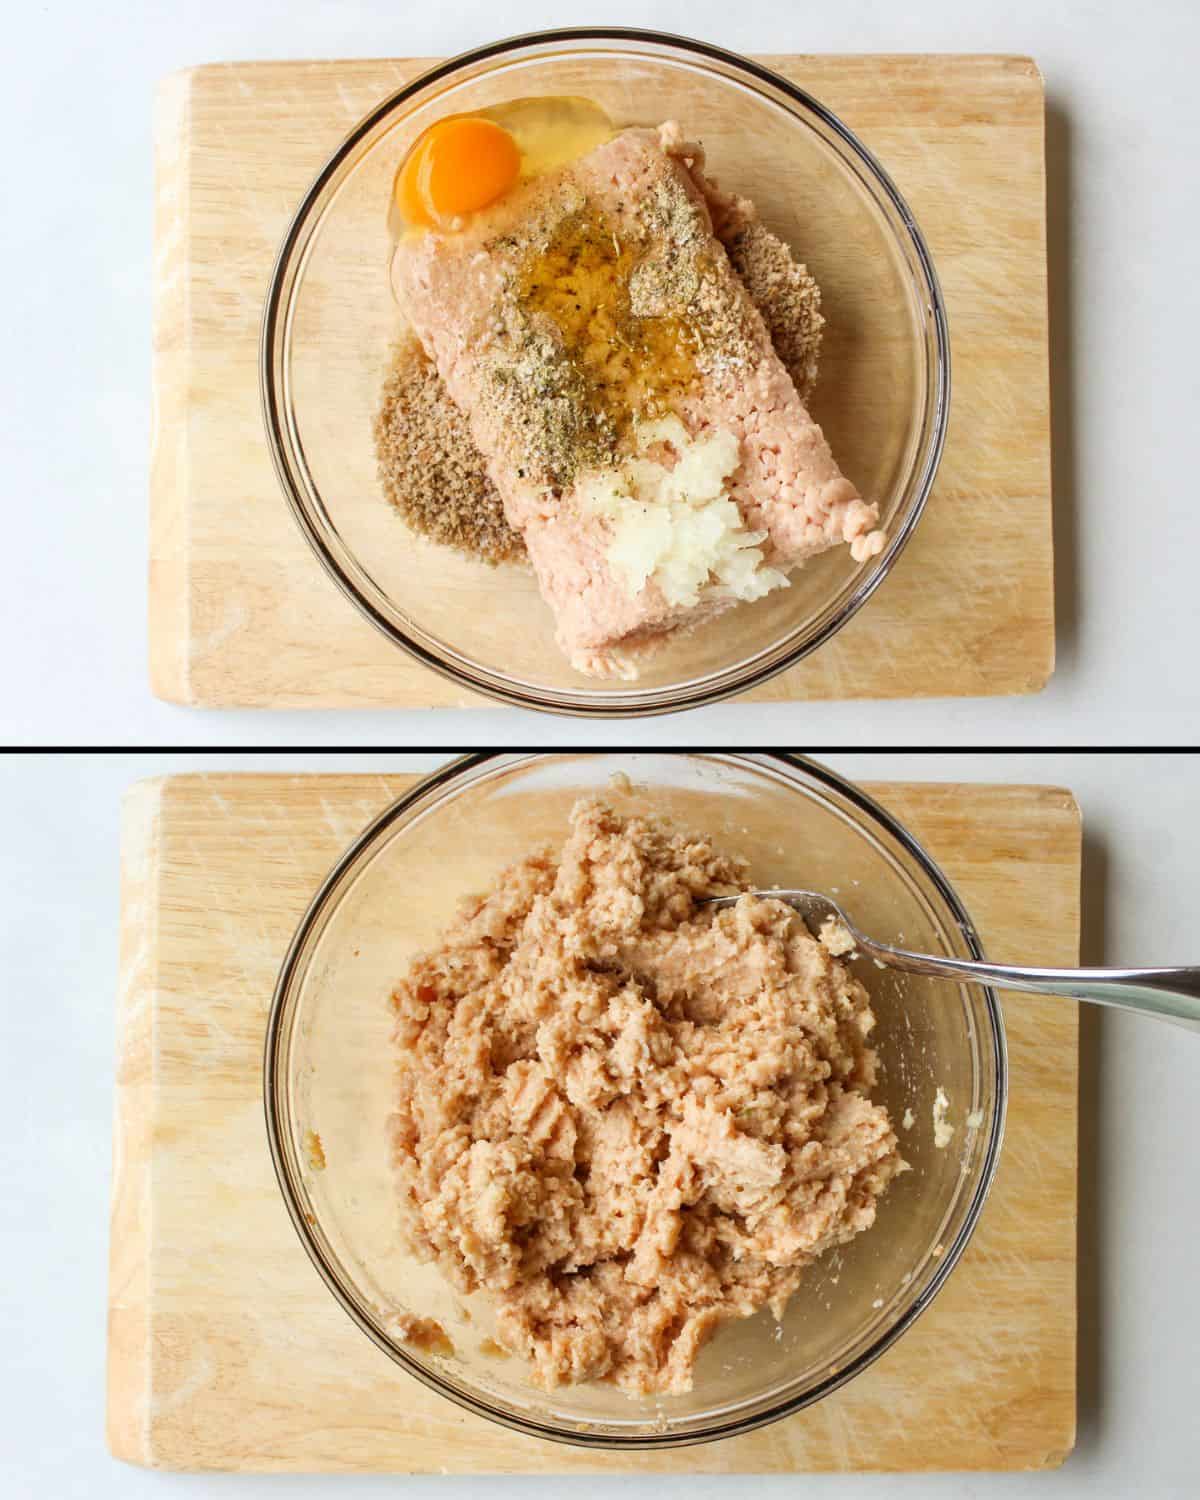 The top image is the glass bowl with added main ingredients. The bottom image is the same glass bowl with a mixed meat mixture and a fork.